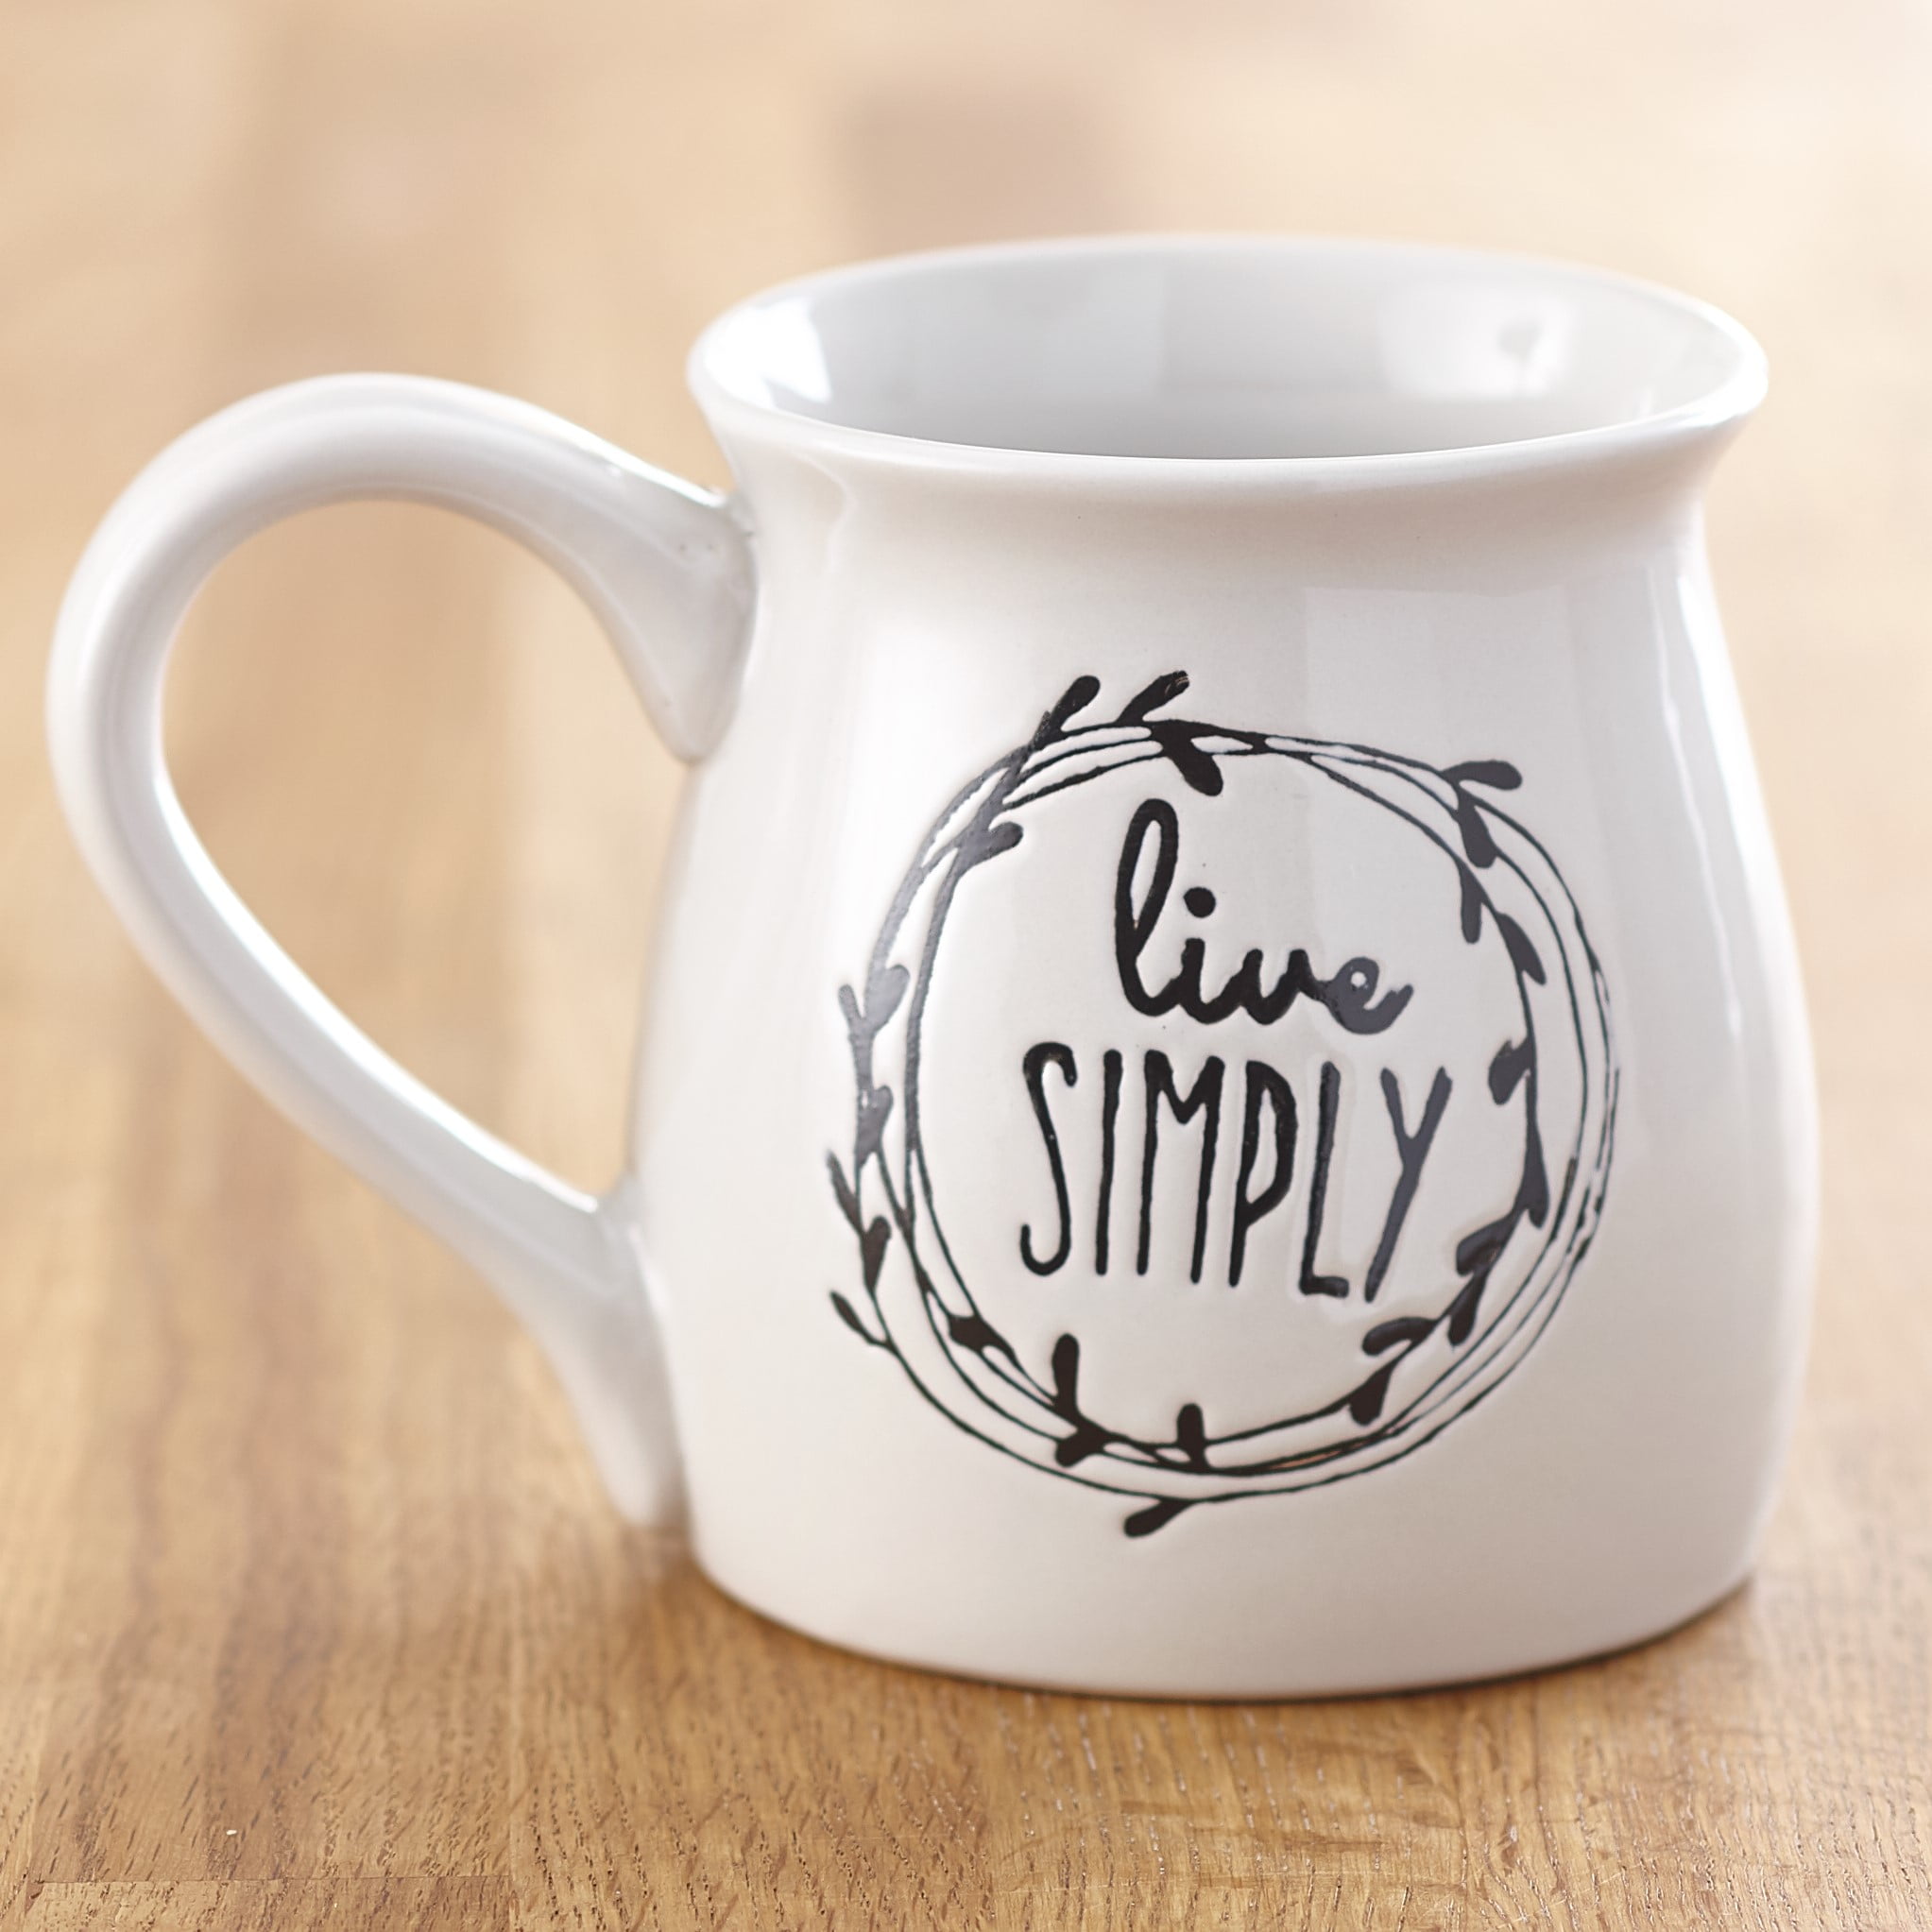 27 Monogram Mugs that are Perfect Gifts - Cottage style decor